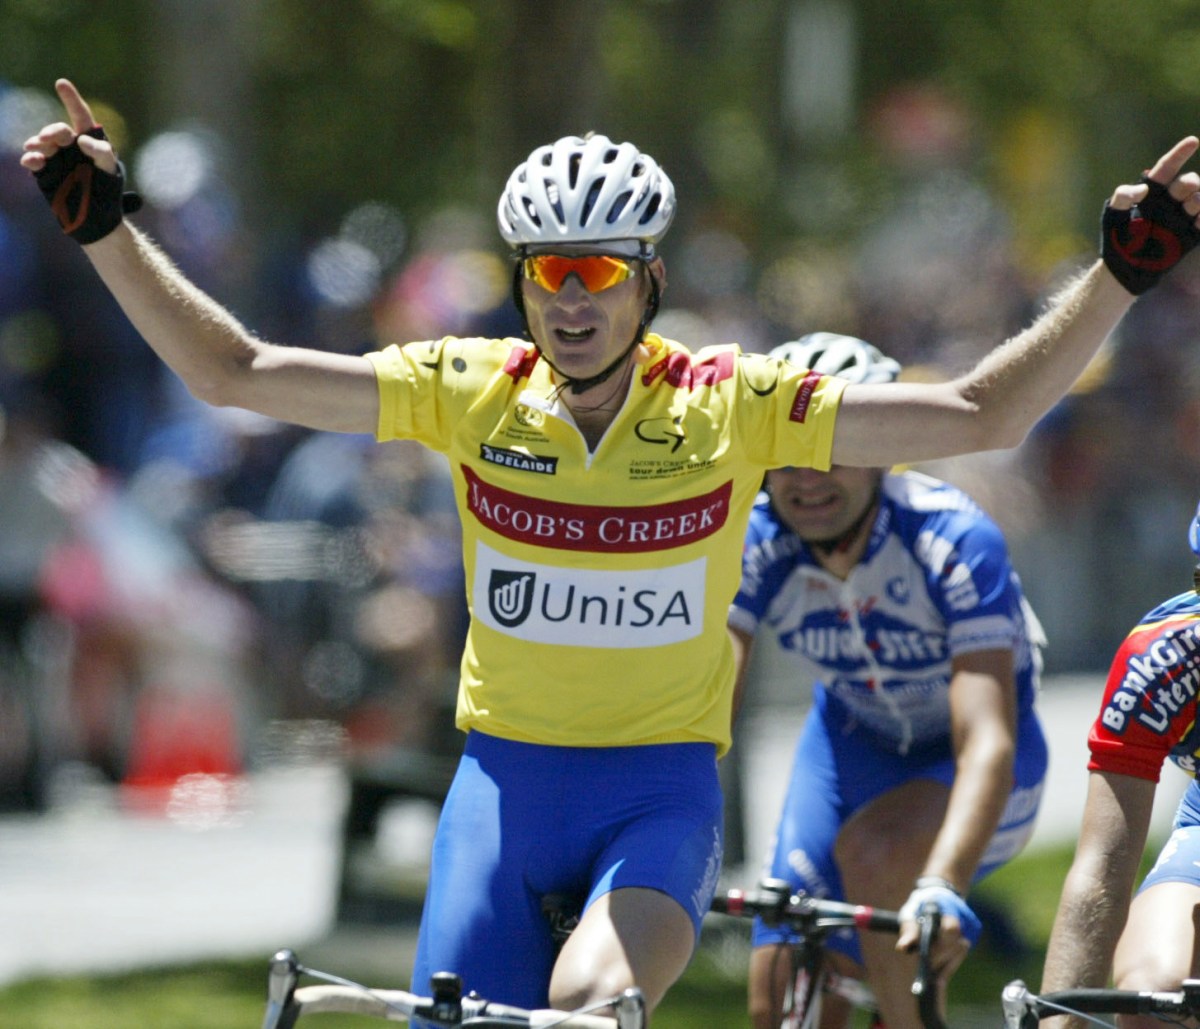 Adelaide, January 25, 2004. South Australian Patrick Jonker (UniSA Team) crosses the finish line to win the tour outright in the final day of the Jacob's Creek Tour Down Under in Adelaide, South Australia. (AAP Image/Tom Miletic) NO ARCHIVING